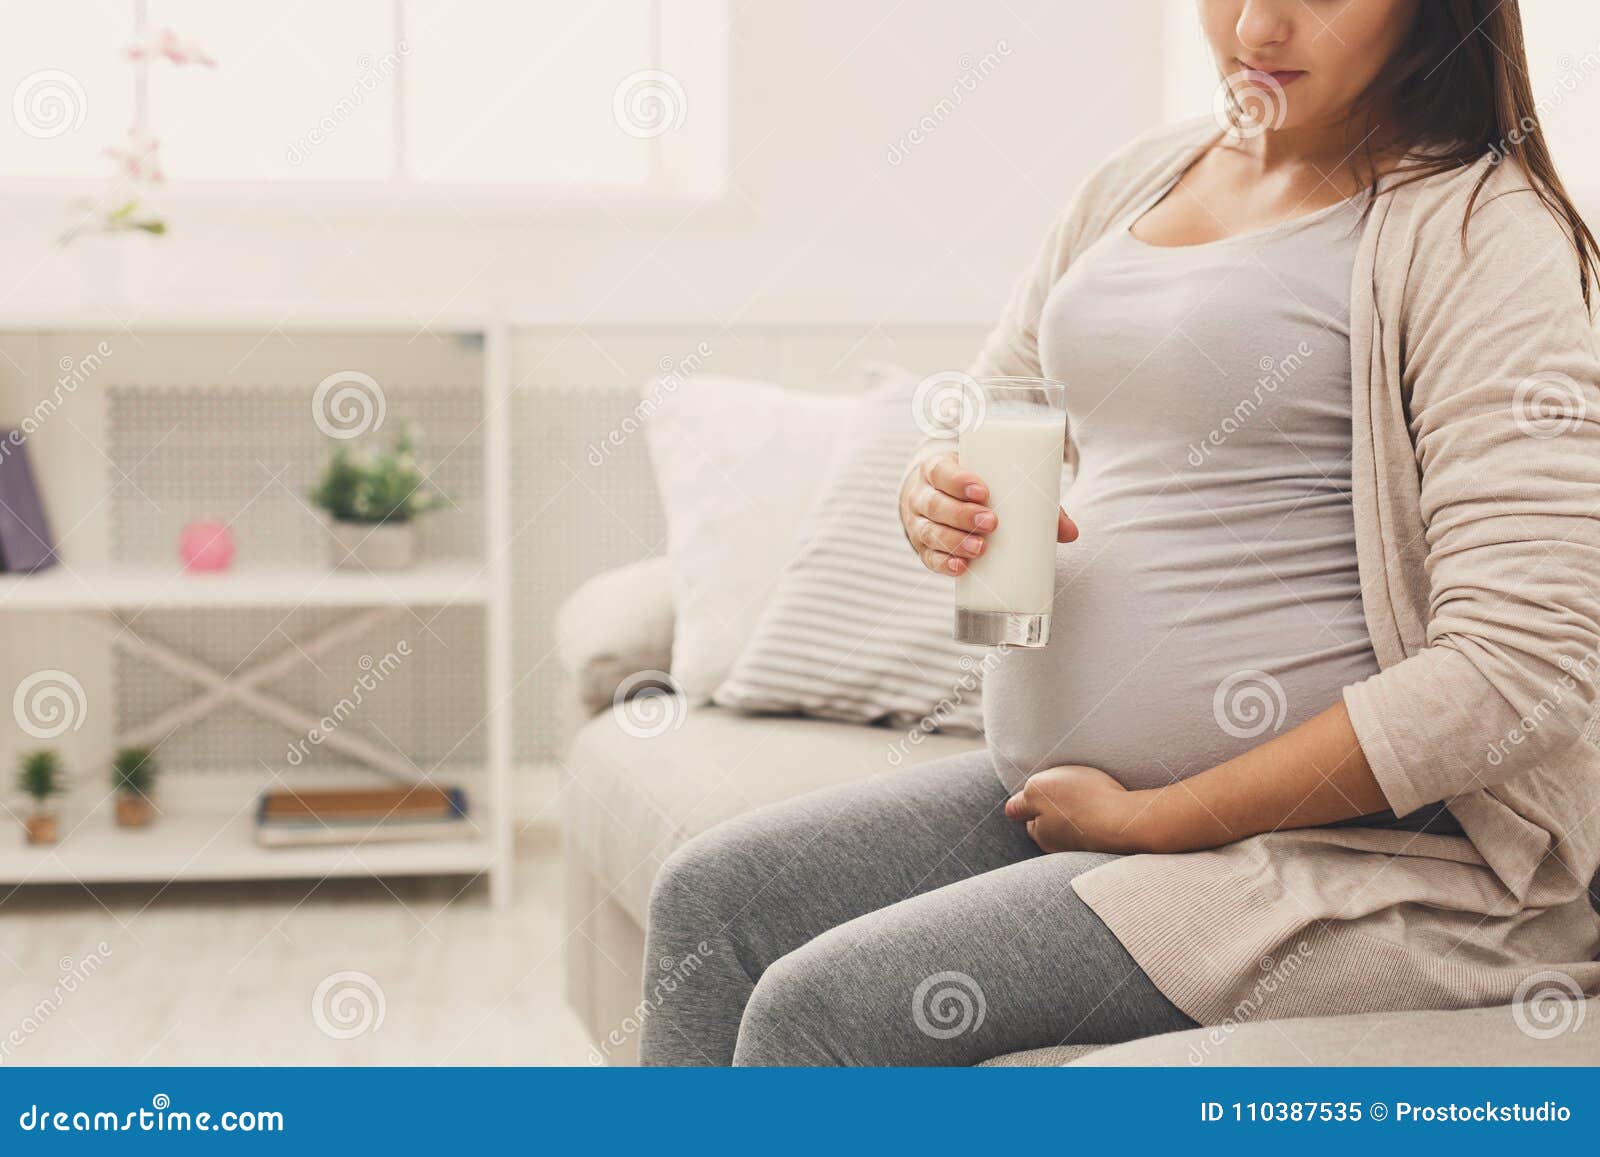 Pregnant Woman Drinking Glass Of Milk Copy Space Stock Image Imag